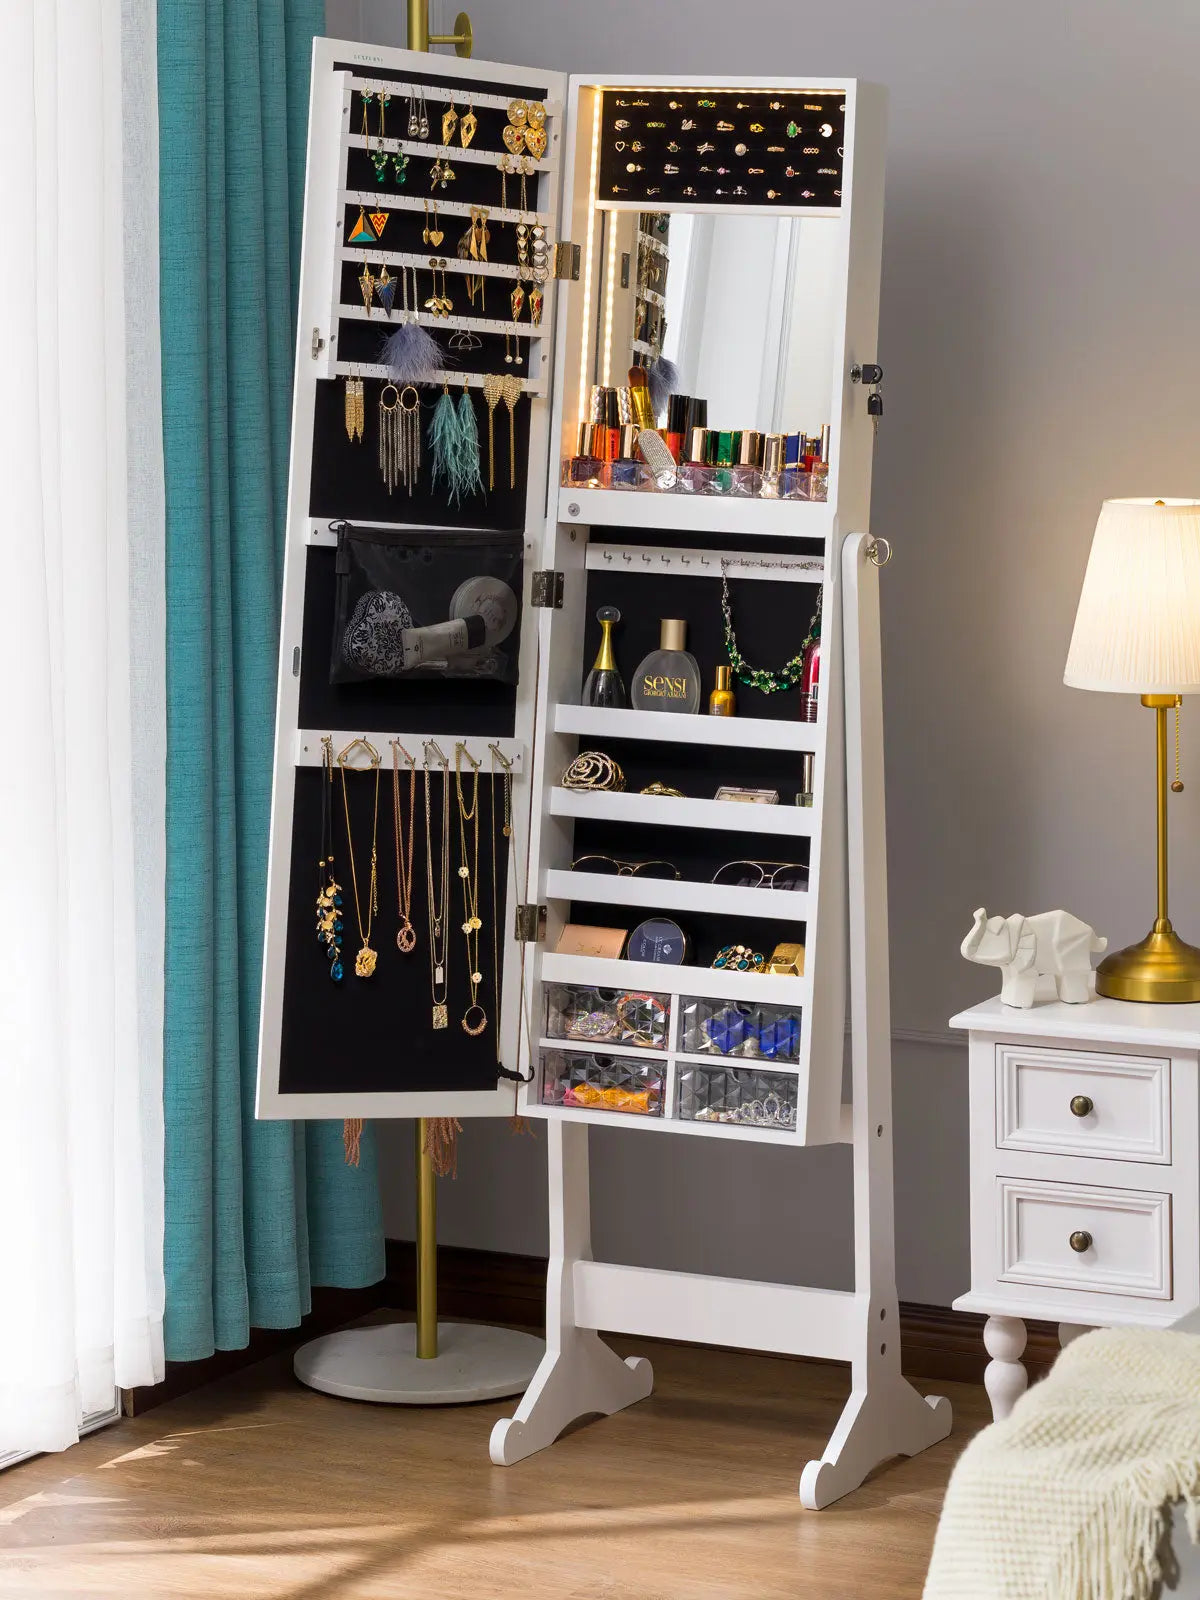 Luxfurni | Jewelry Armoire | Standing Stella 6 Jewelry Armoire Full Length Mirror With Built-in Lights - White